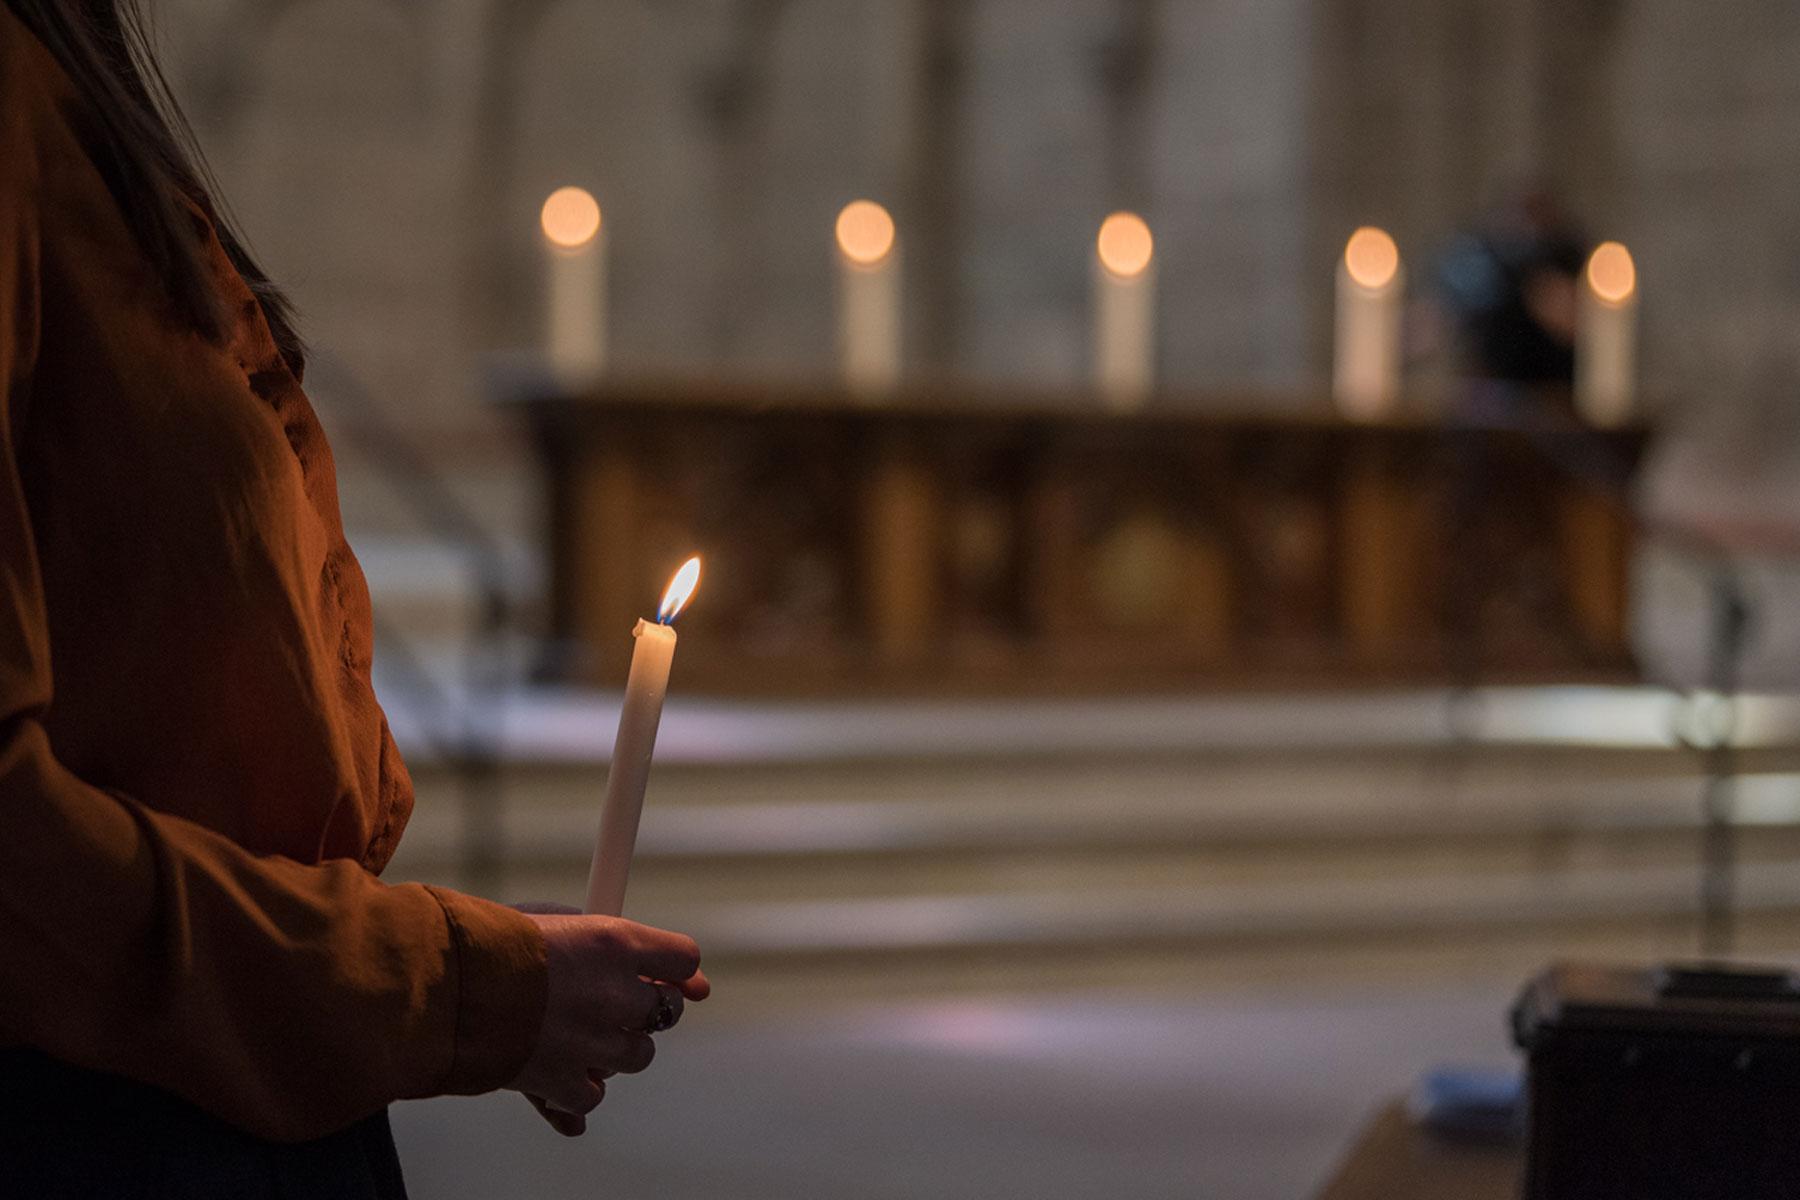 Emma van Dorp lit five symbolic candles on the altar, as the church leaders affirmed the âwish to make more visible our common witness in worship and service, on our journey together towards visible unity.â Photo: LWF/Albin Hillert